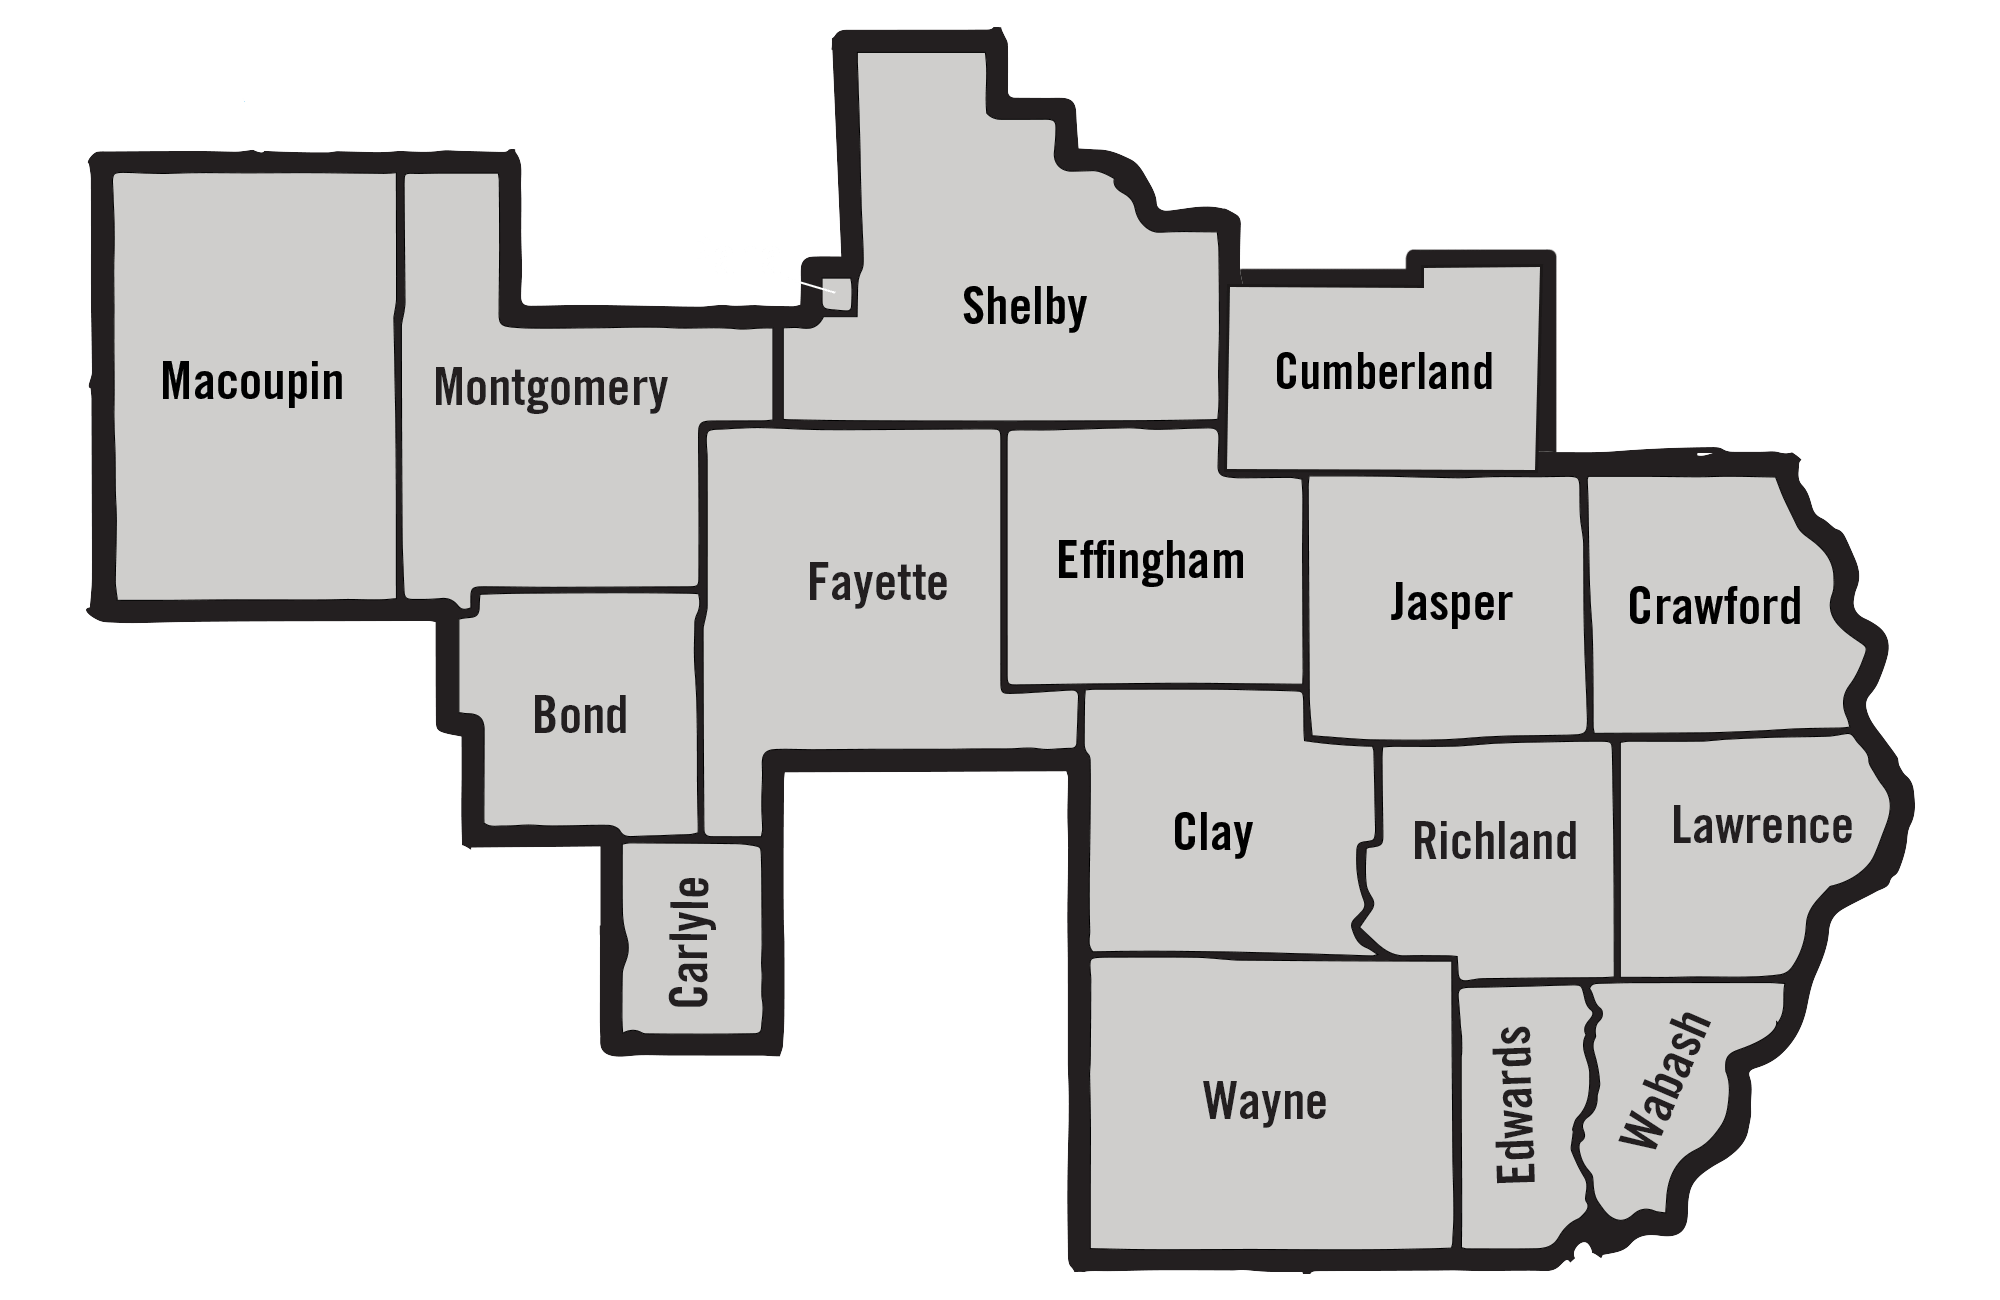 South Central Illinois FCA Area Map